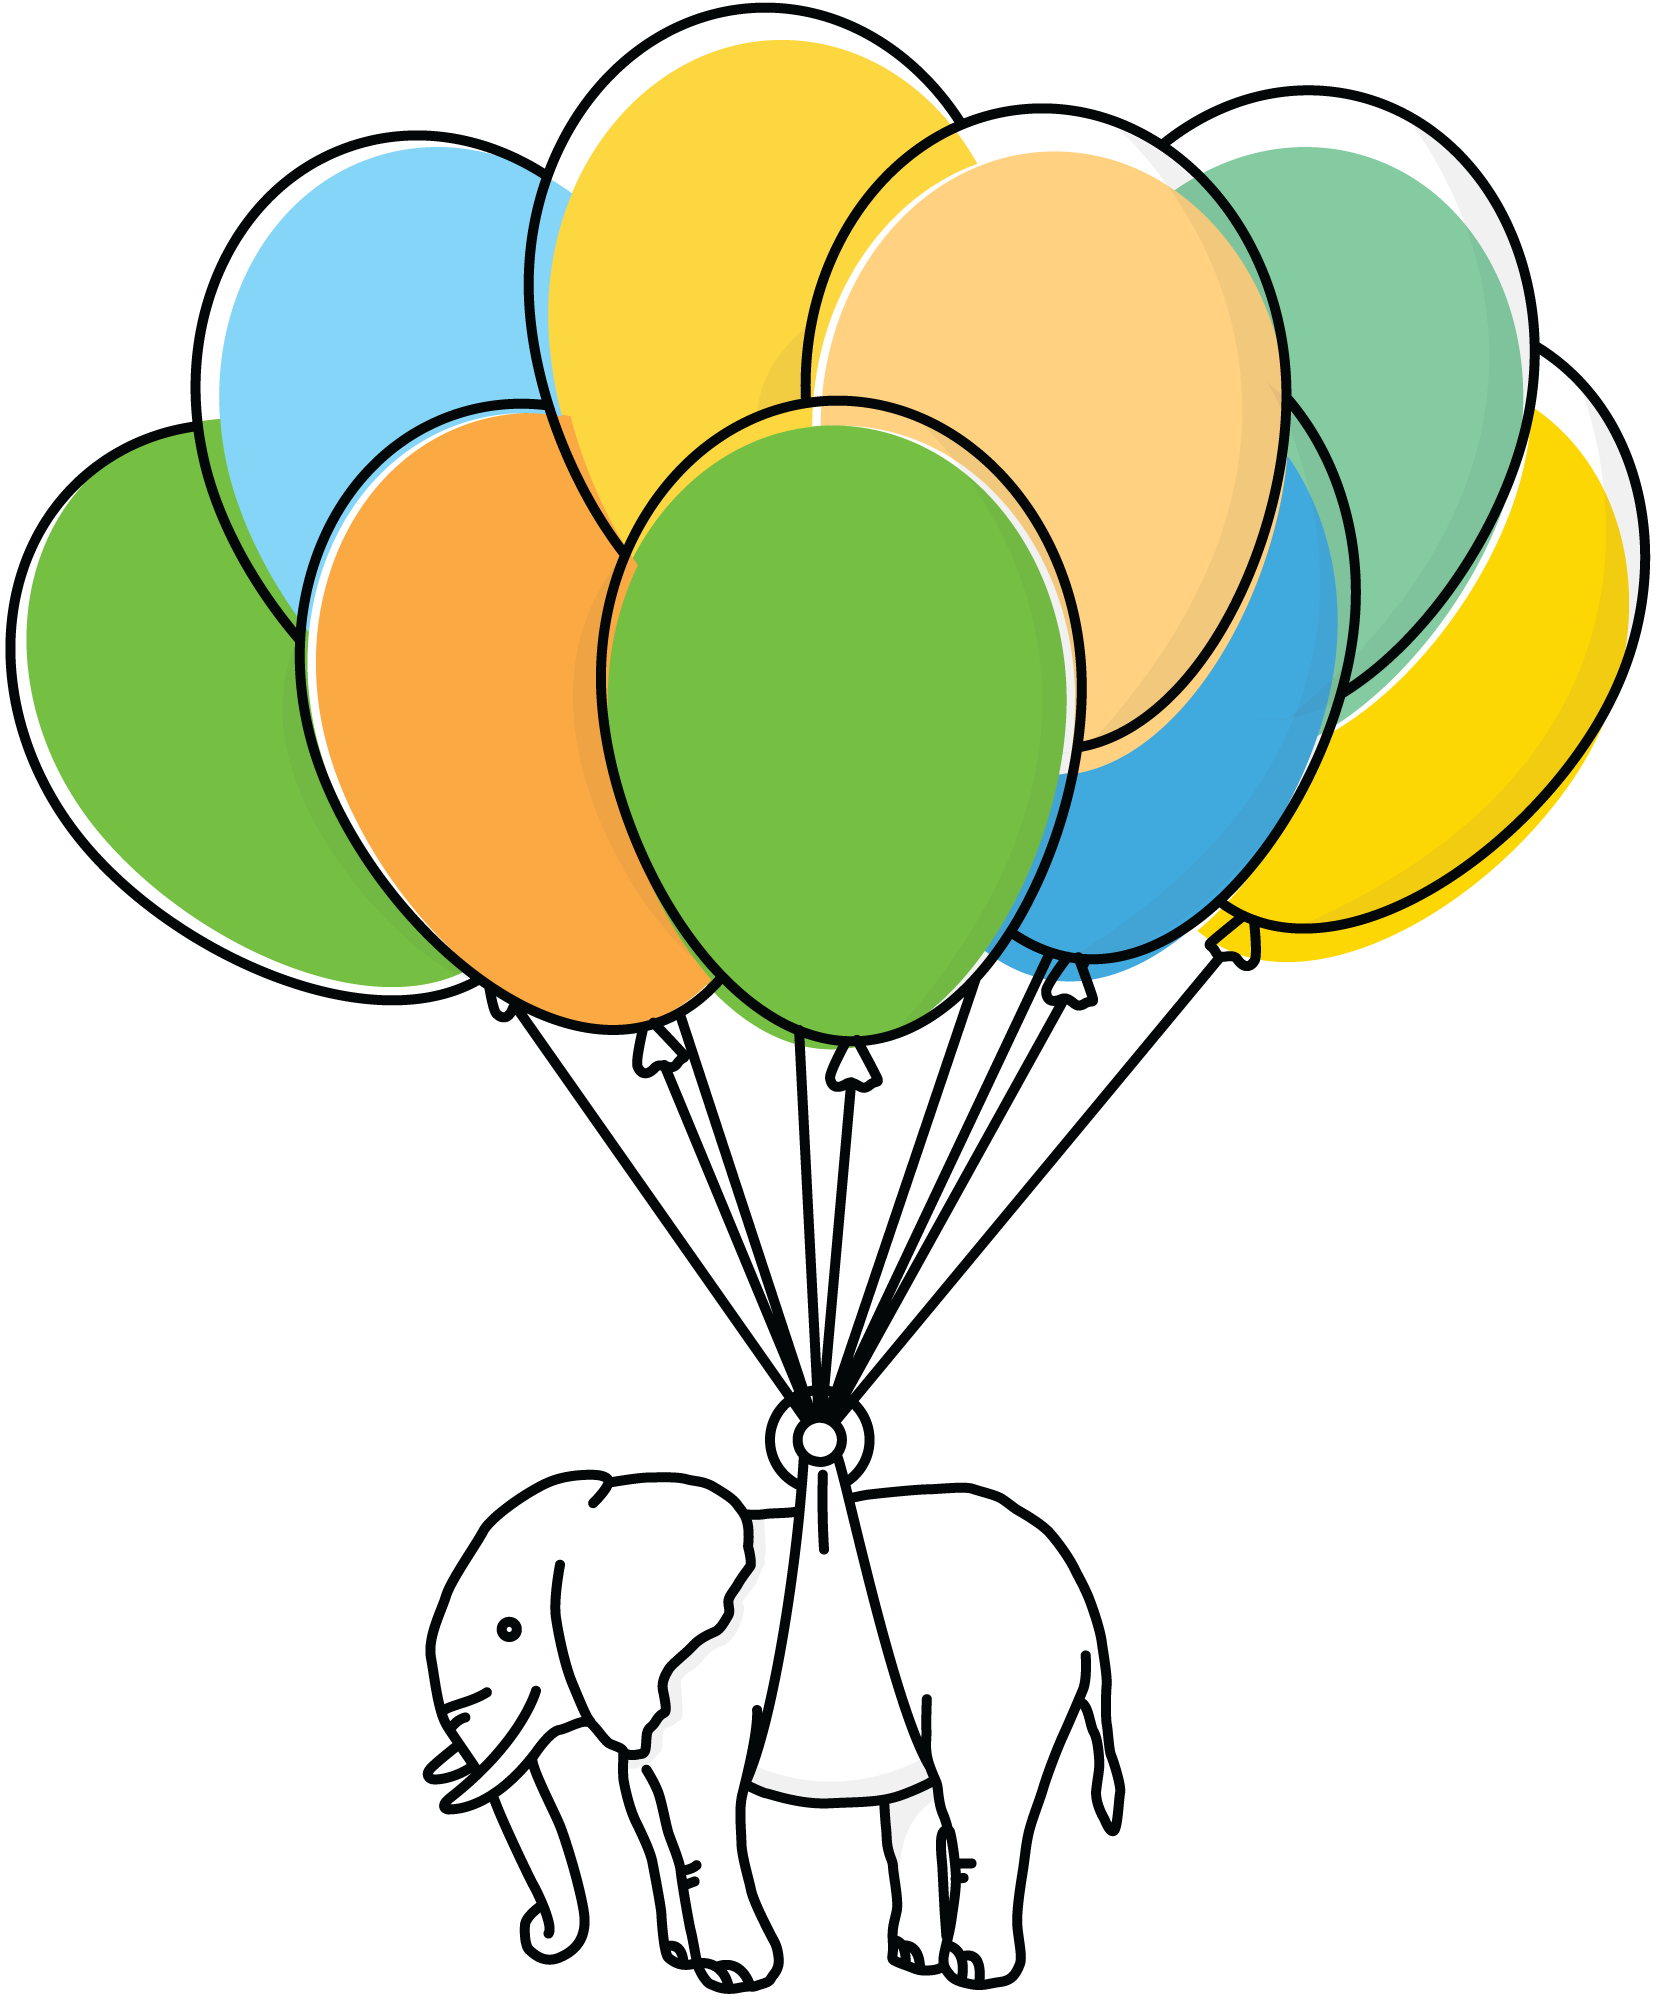 Elephant held by coloured balloons